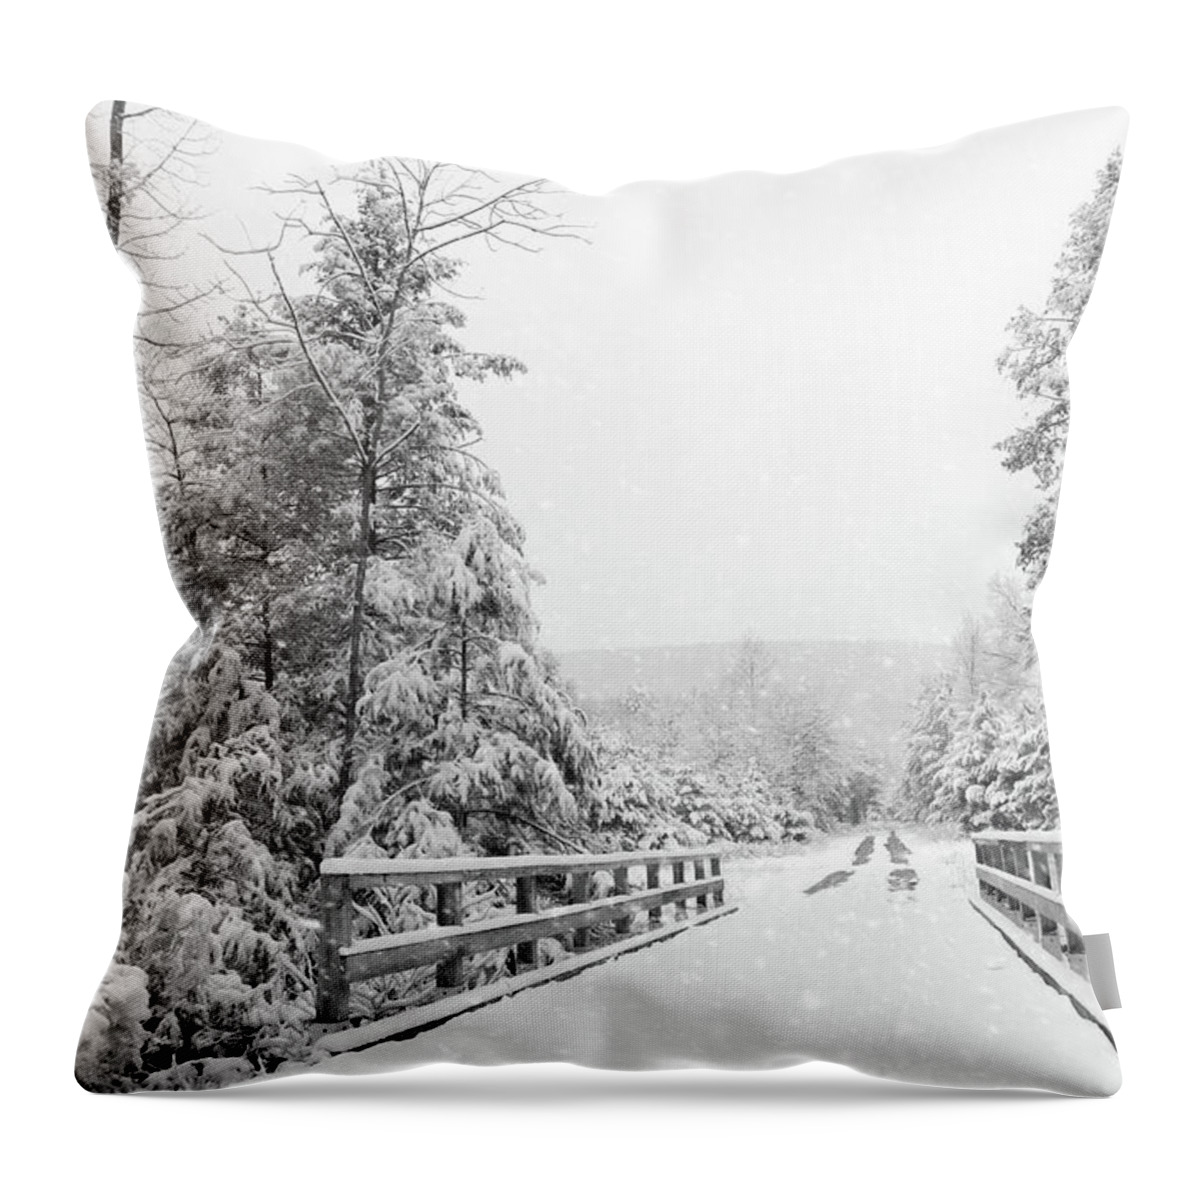 Snow Throw Pillow featuring the photograph Kindness Is Like Snow by Lori Deiter